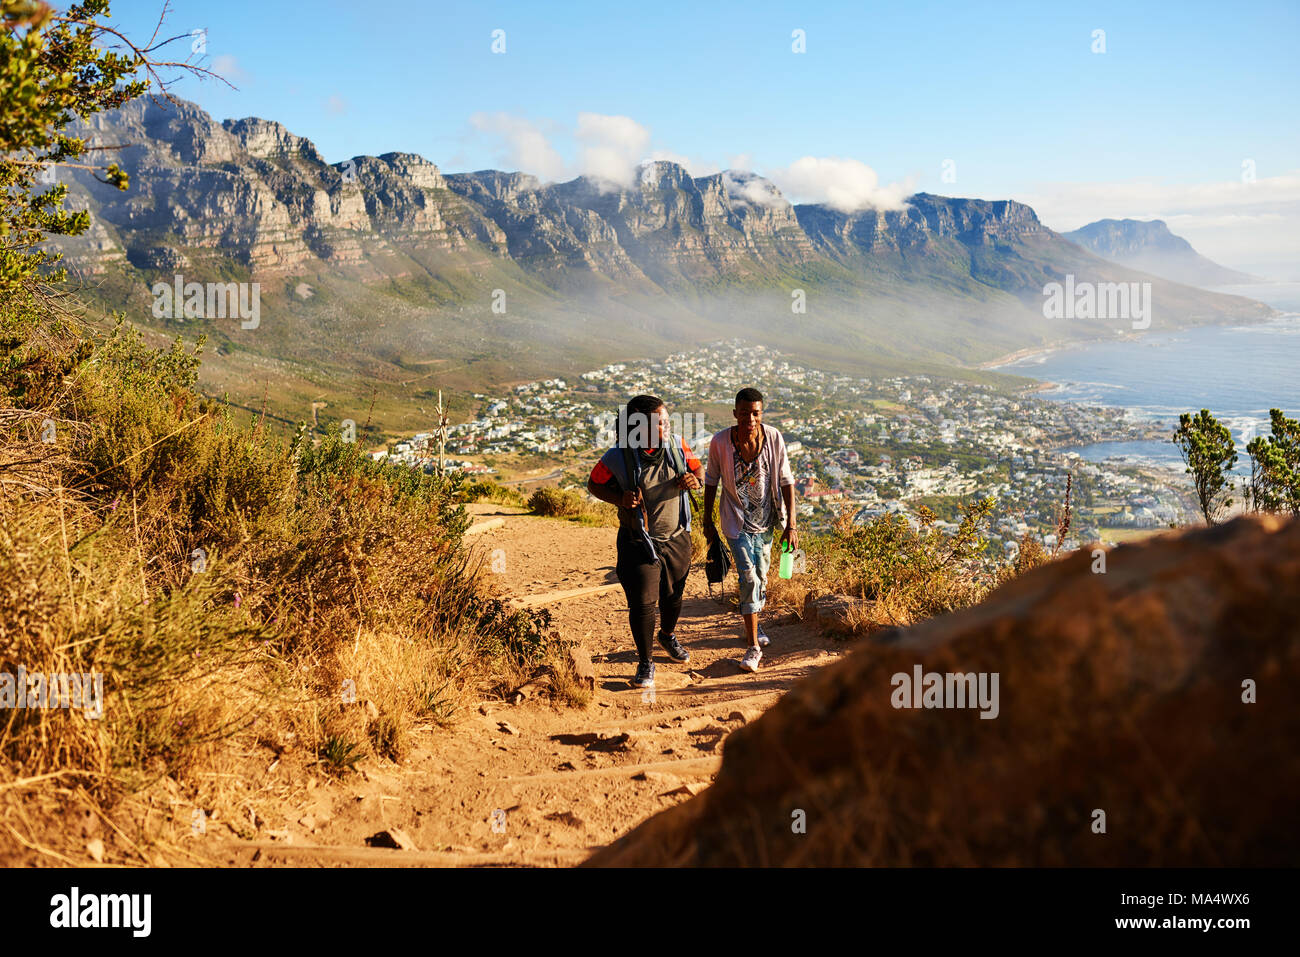 Two black male friends hiking a mountainous trail with a stunning scene of mountains, ocean and city scape behind them, as they ascend the mountain, c Stock Photo